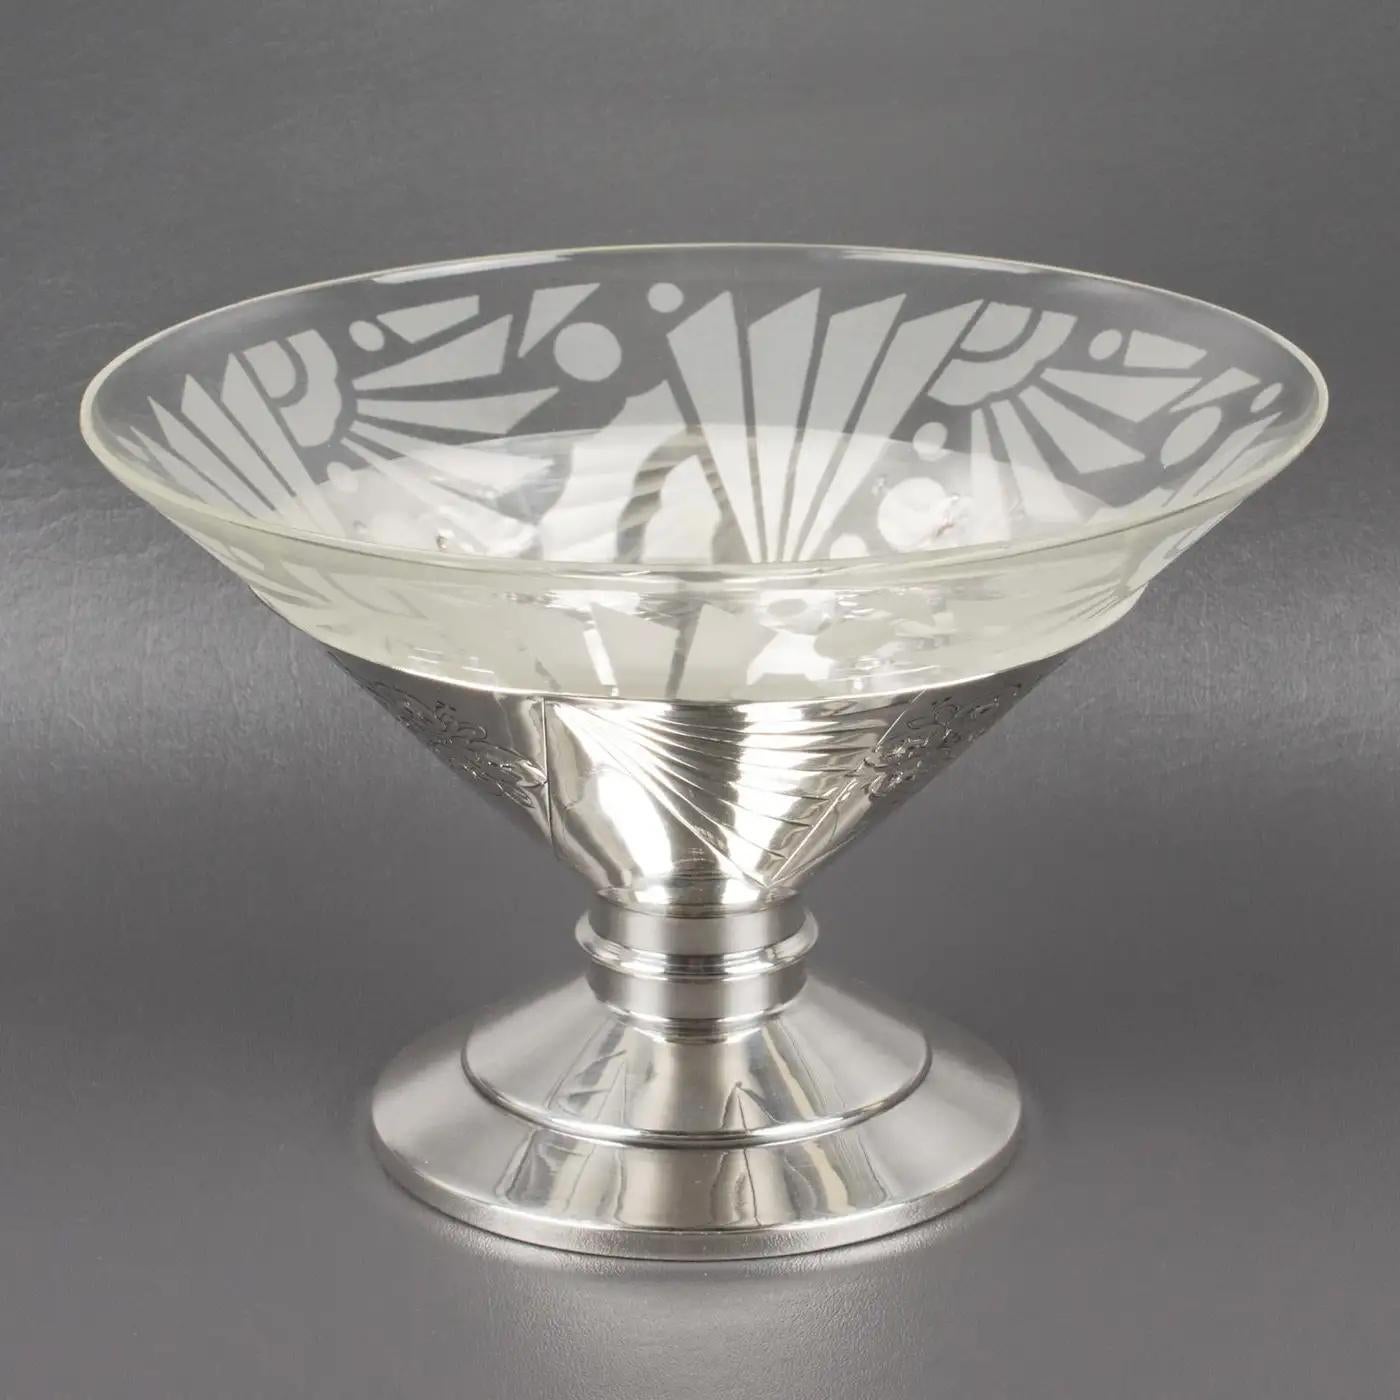 French silversmith SFAM, Paris (Société Francaise d'Alliages et de Métaux) designed this stunning Art Deco centerpiece or serving bowl. The tall pedestal shape is silver-plated metal with stylized floral and geometric embossed design. The insert